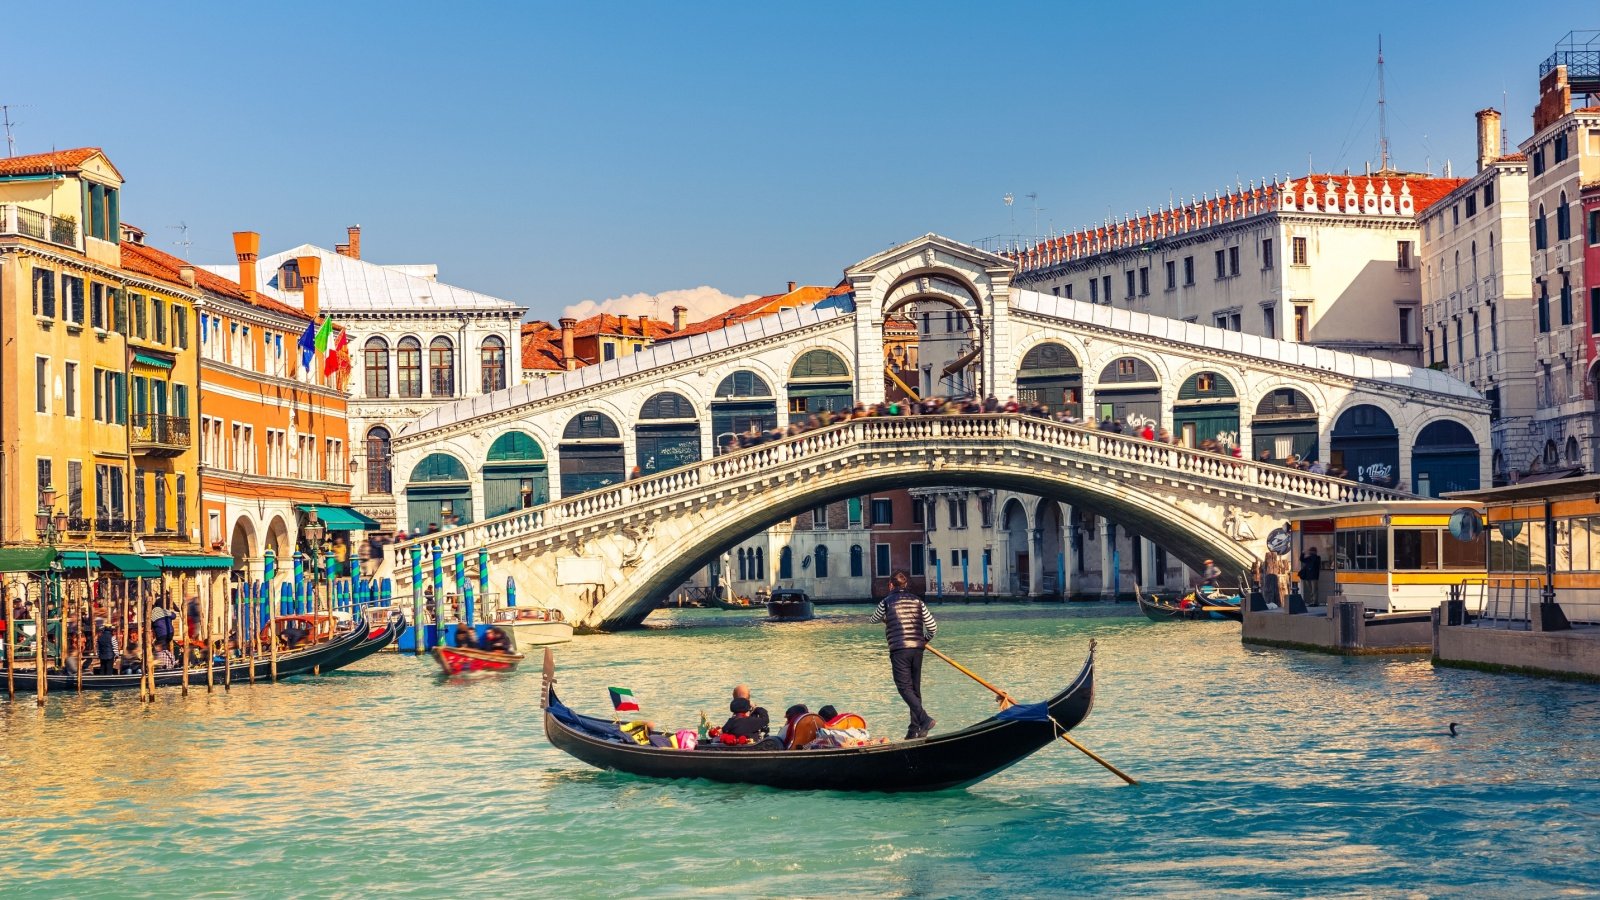 <p>Venice, Italy is a beautiful place with a lot to see and do. But, it’s been a popular tourist destination for years, which has led to high prices and crowded canals and streets.</p>